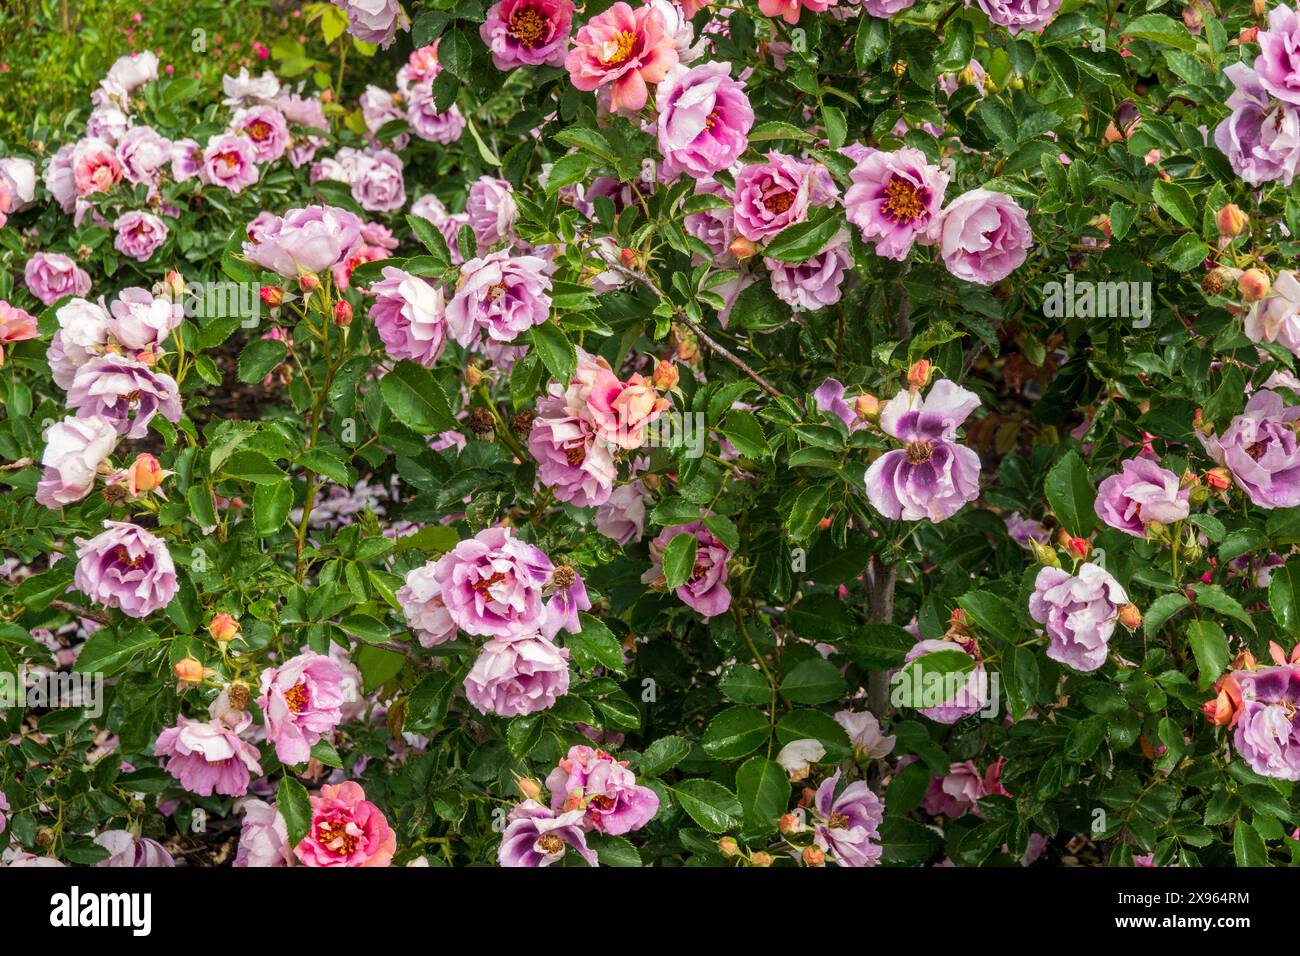 Easy on the Eyes Rose. Clustered, semi-double rose with orange red blooms that fade to lavender. Stock Photo